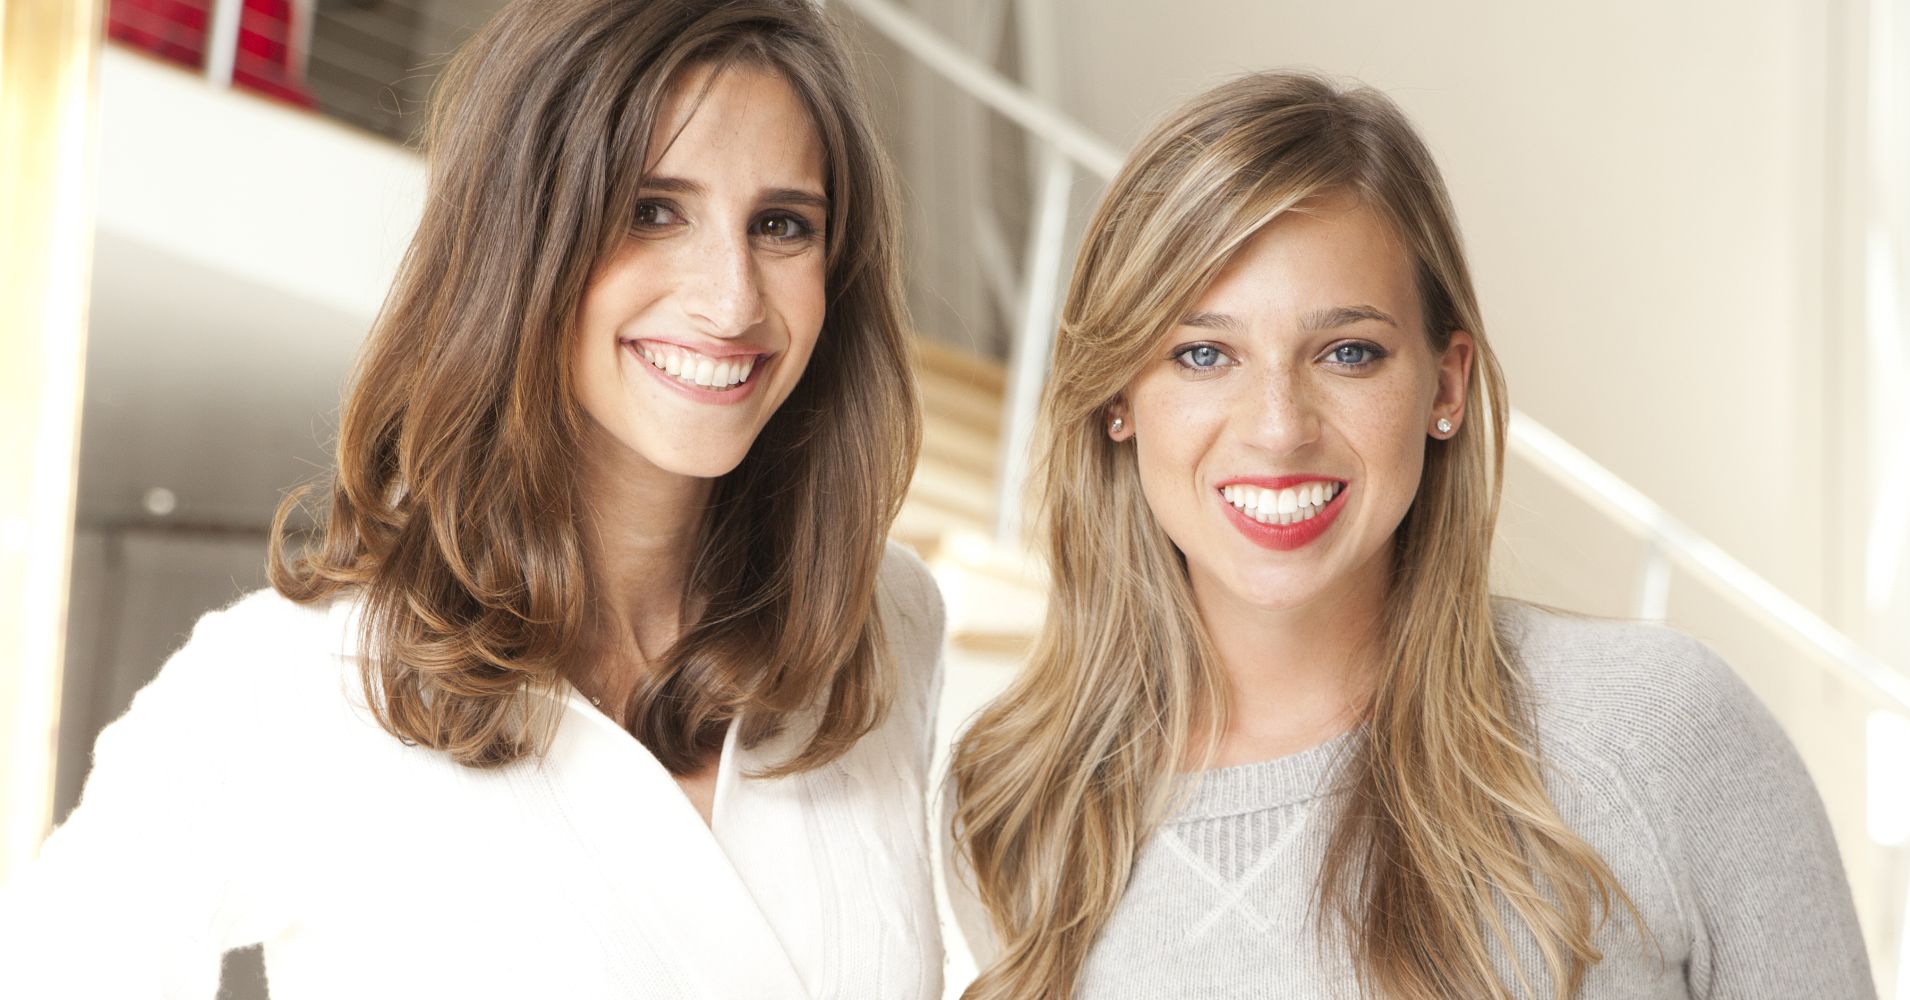 Famous Cofounders: The Skimm